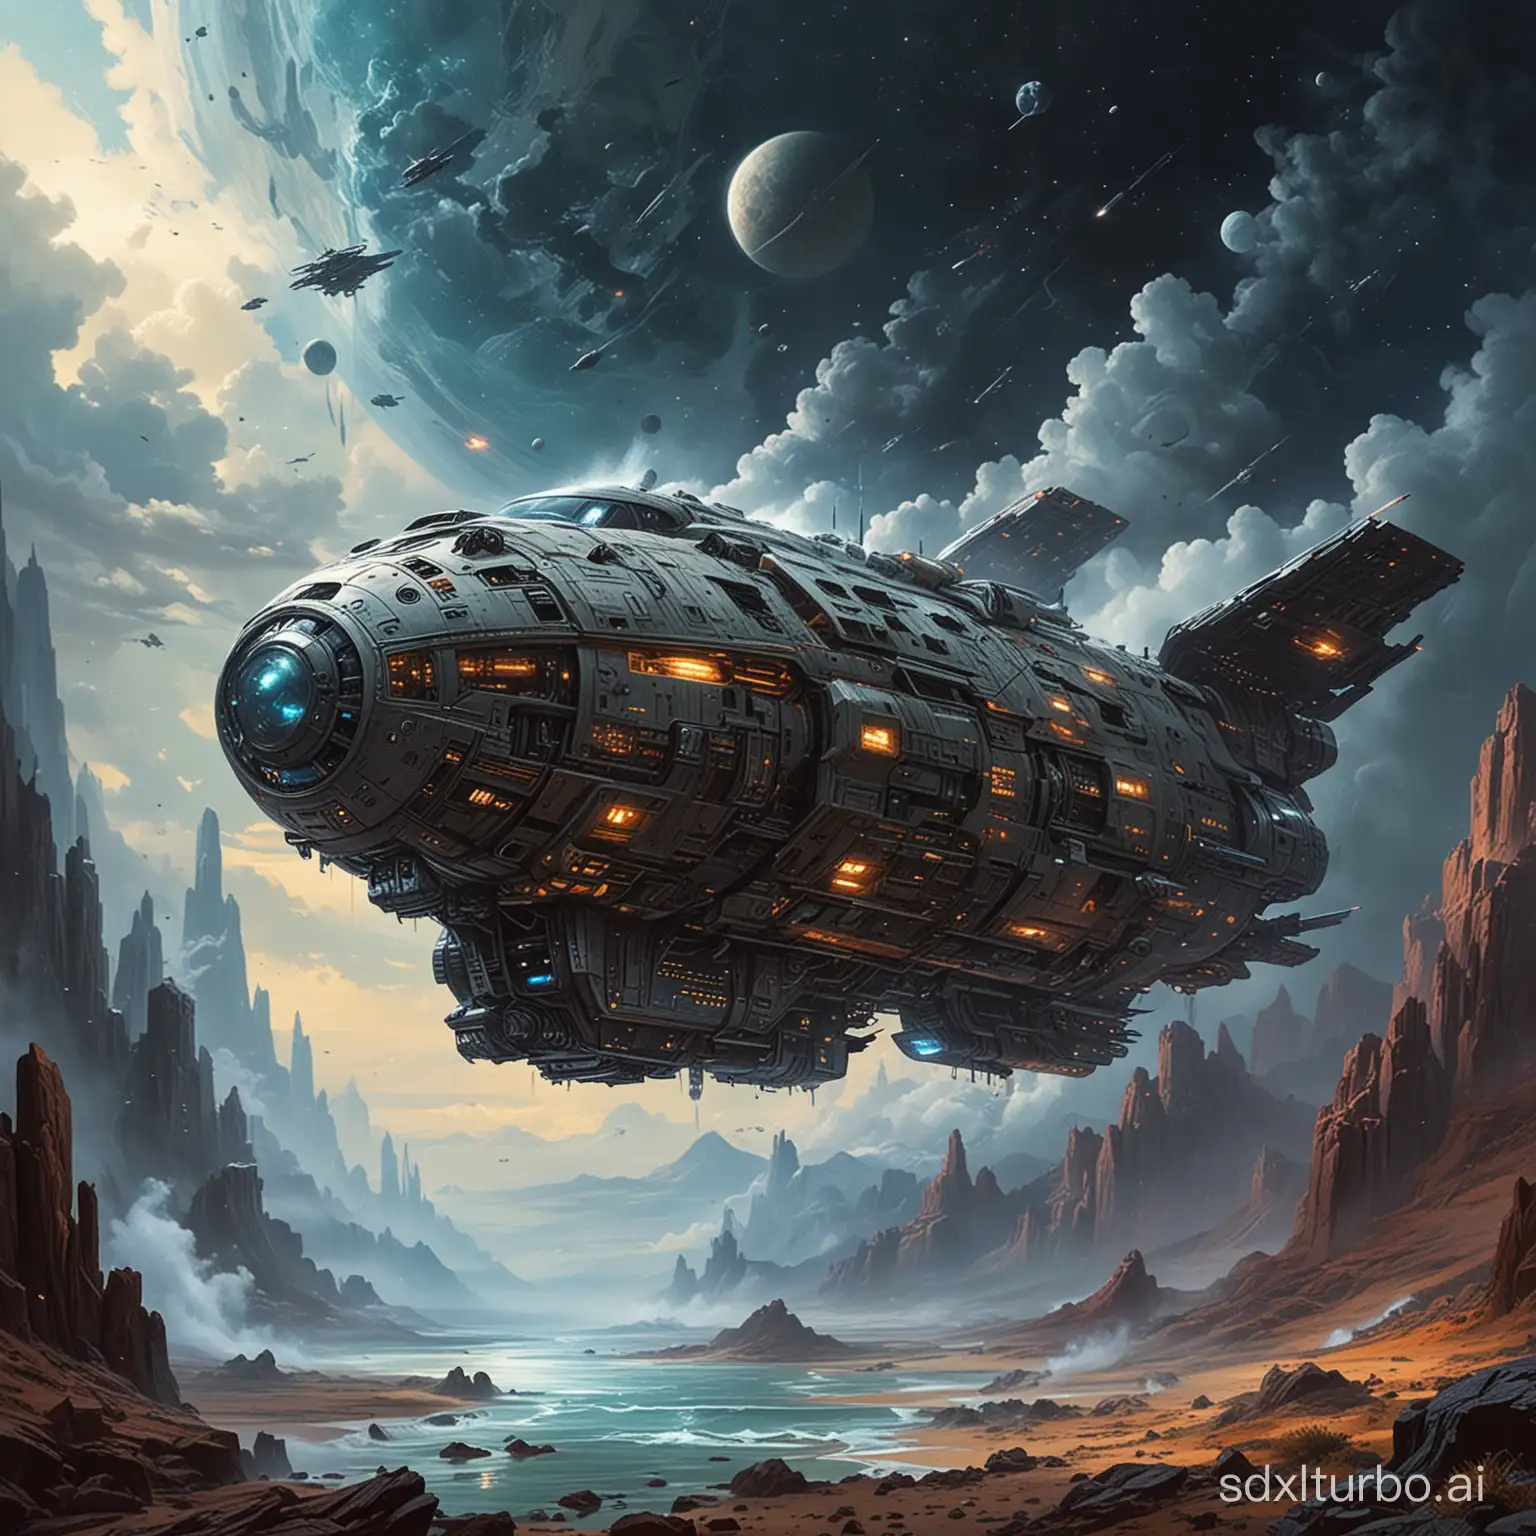 Science fiction painting